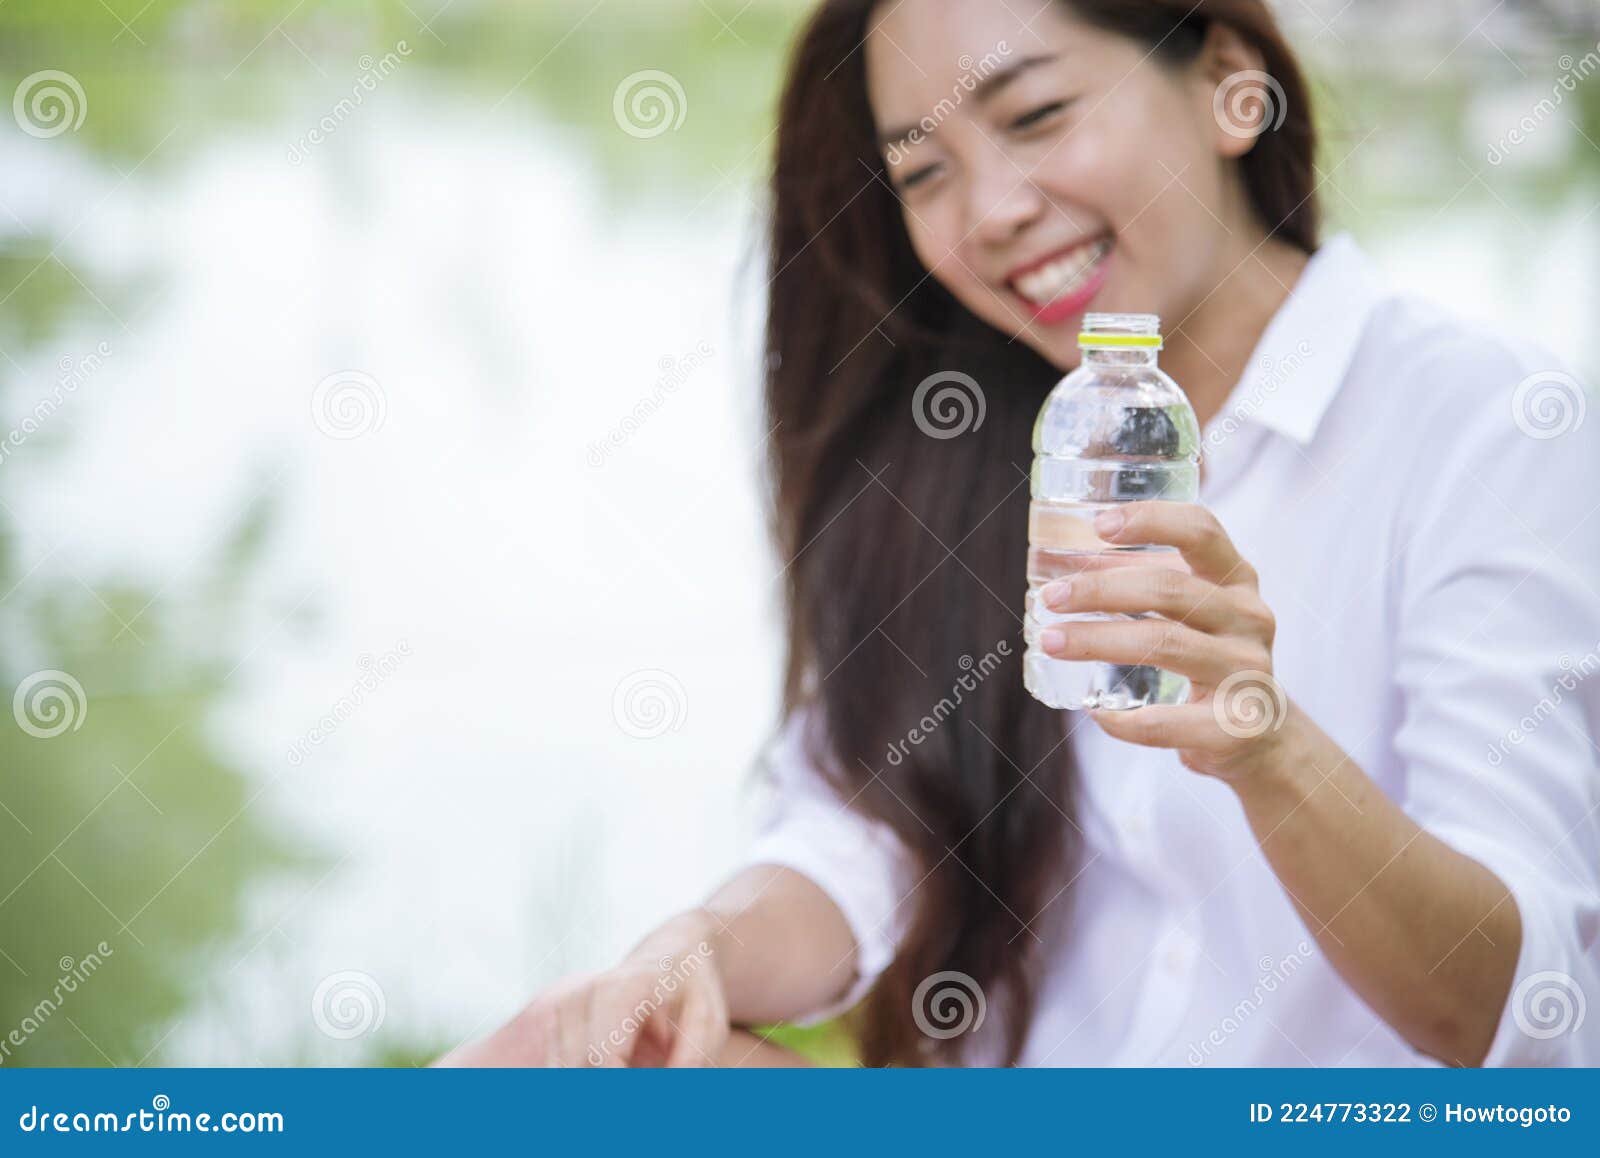 Woman drinking from water bottle Stock Photo by ©photography33 8689824